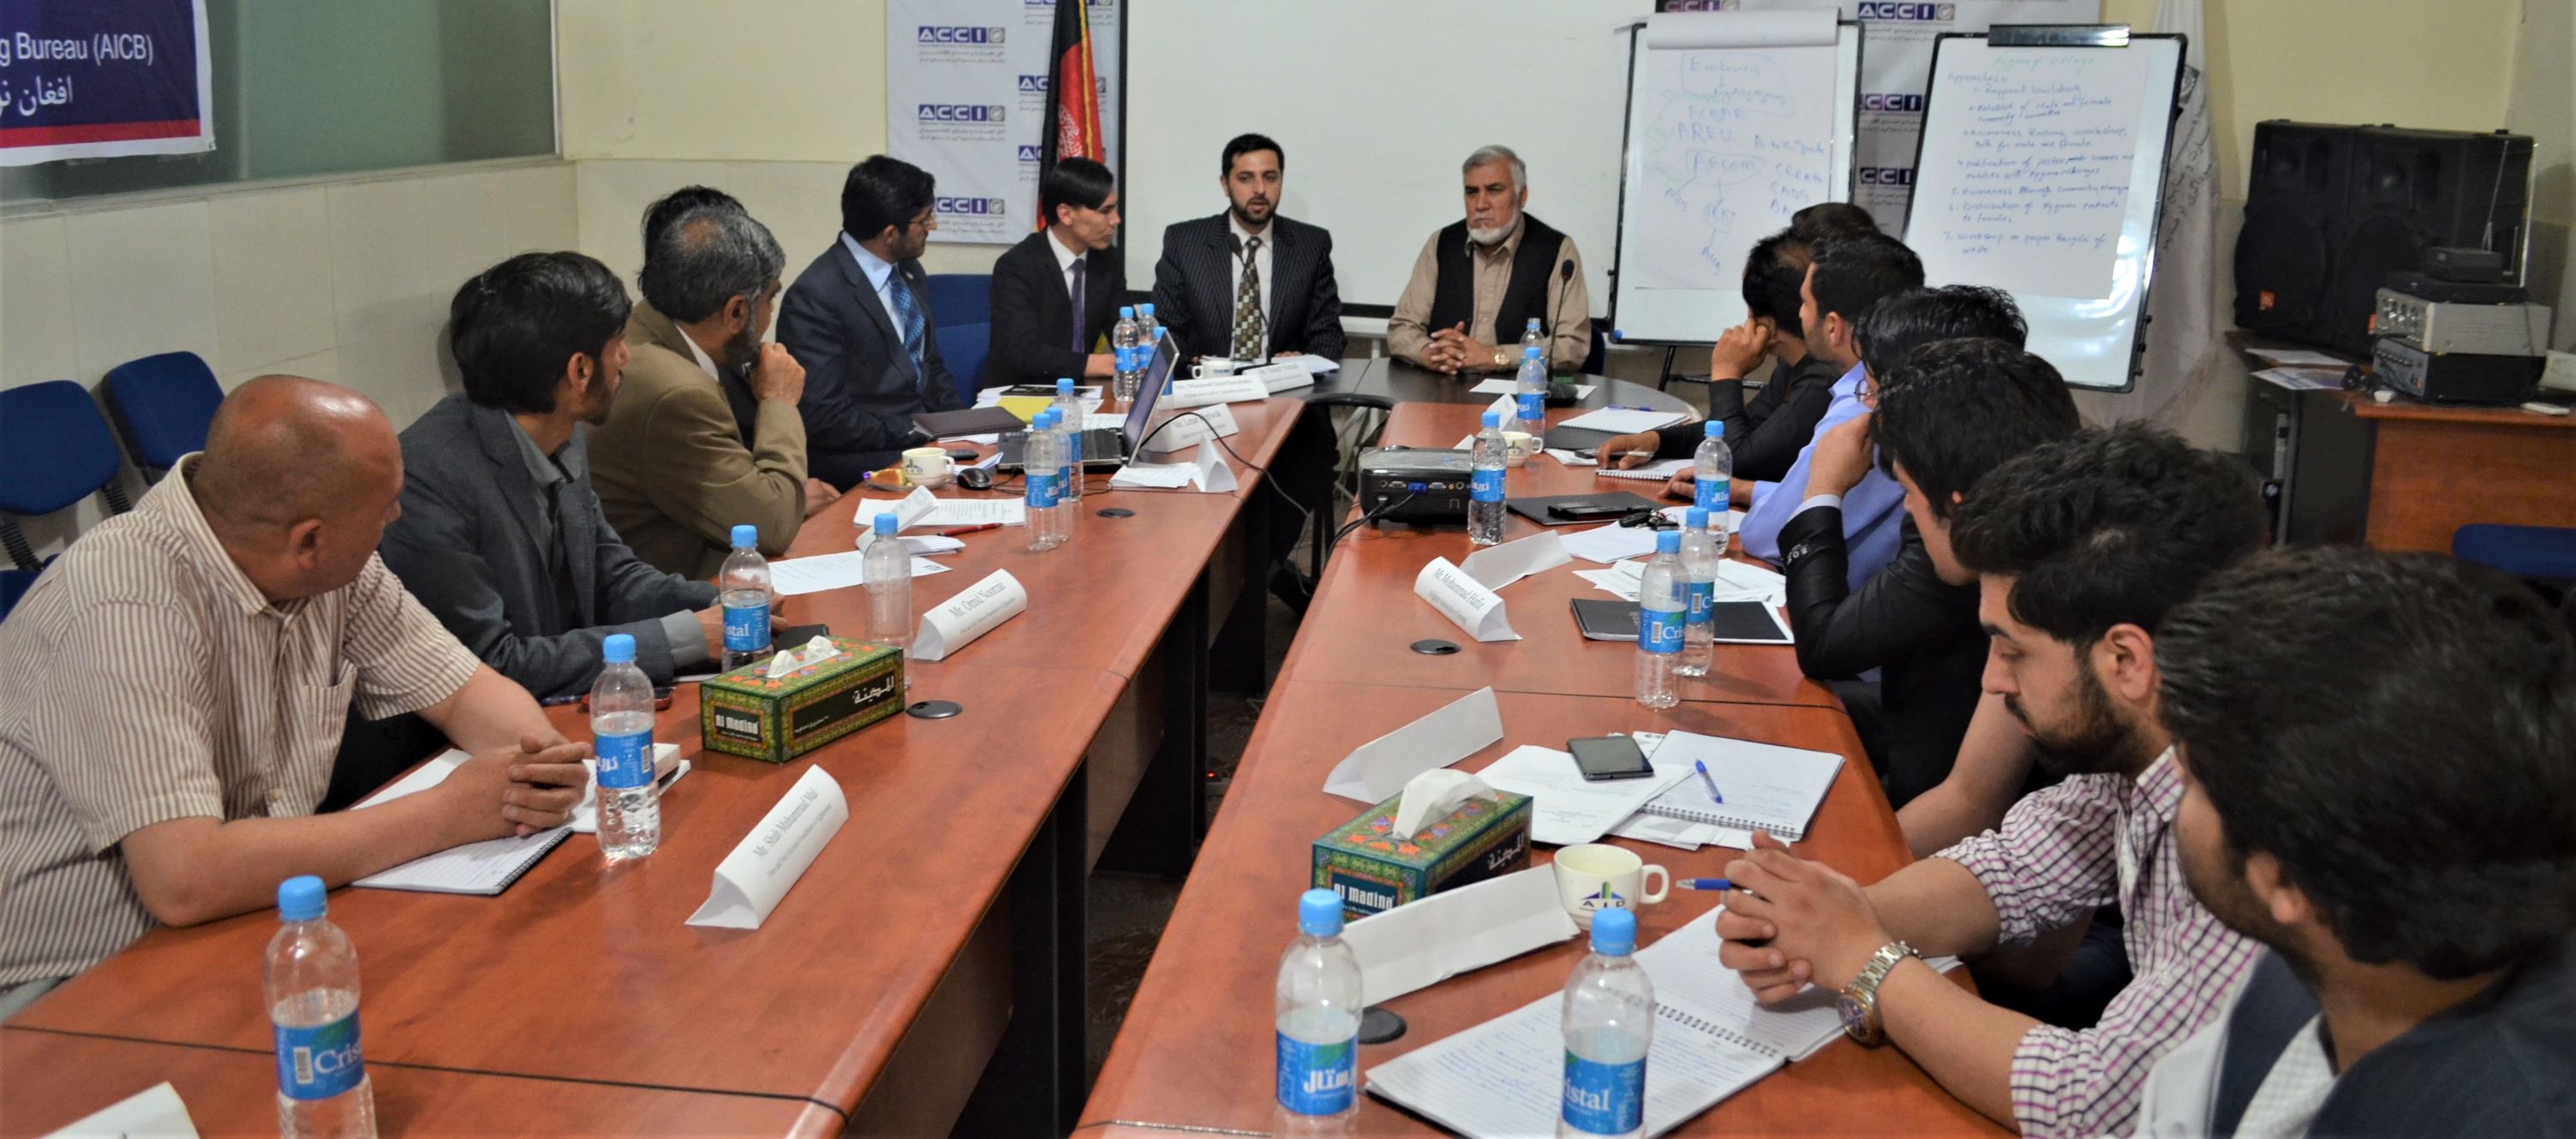 A meeting room full of people, Khan alokozay, project implementation, advisors, consultants, aicb, afghan innovative consulting bureau, consultancy, advisor, consultant, consultancy in Afghanistan, best consultancy